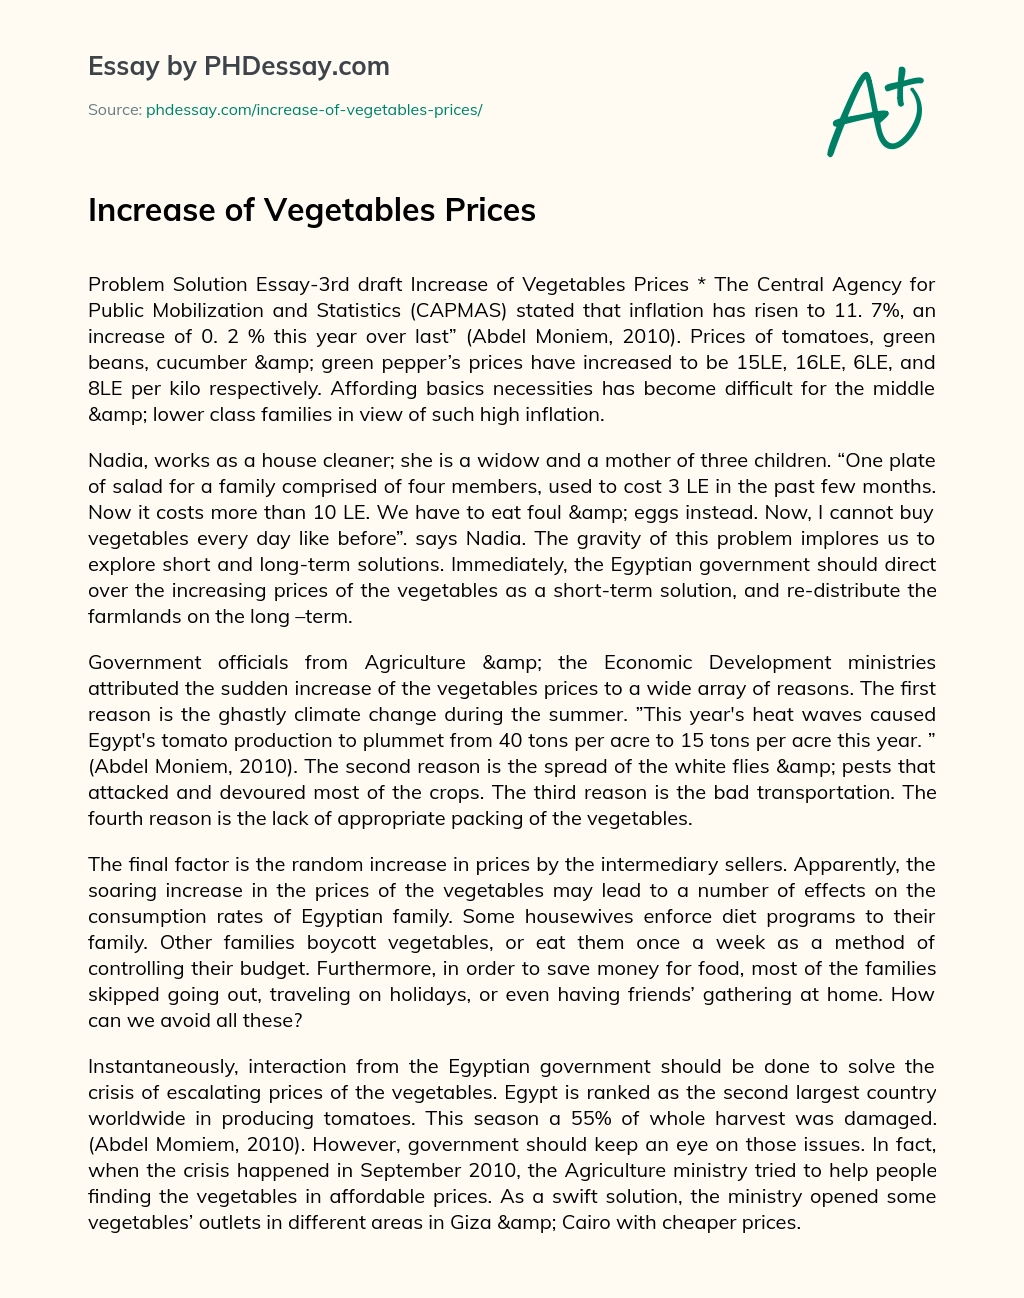 Increase of Vegetables Prices essay